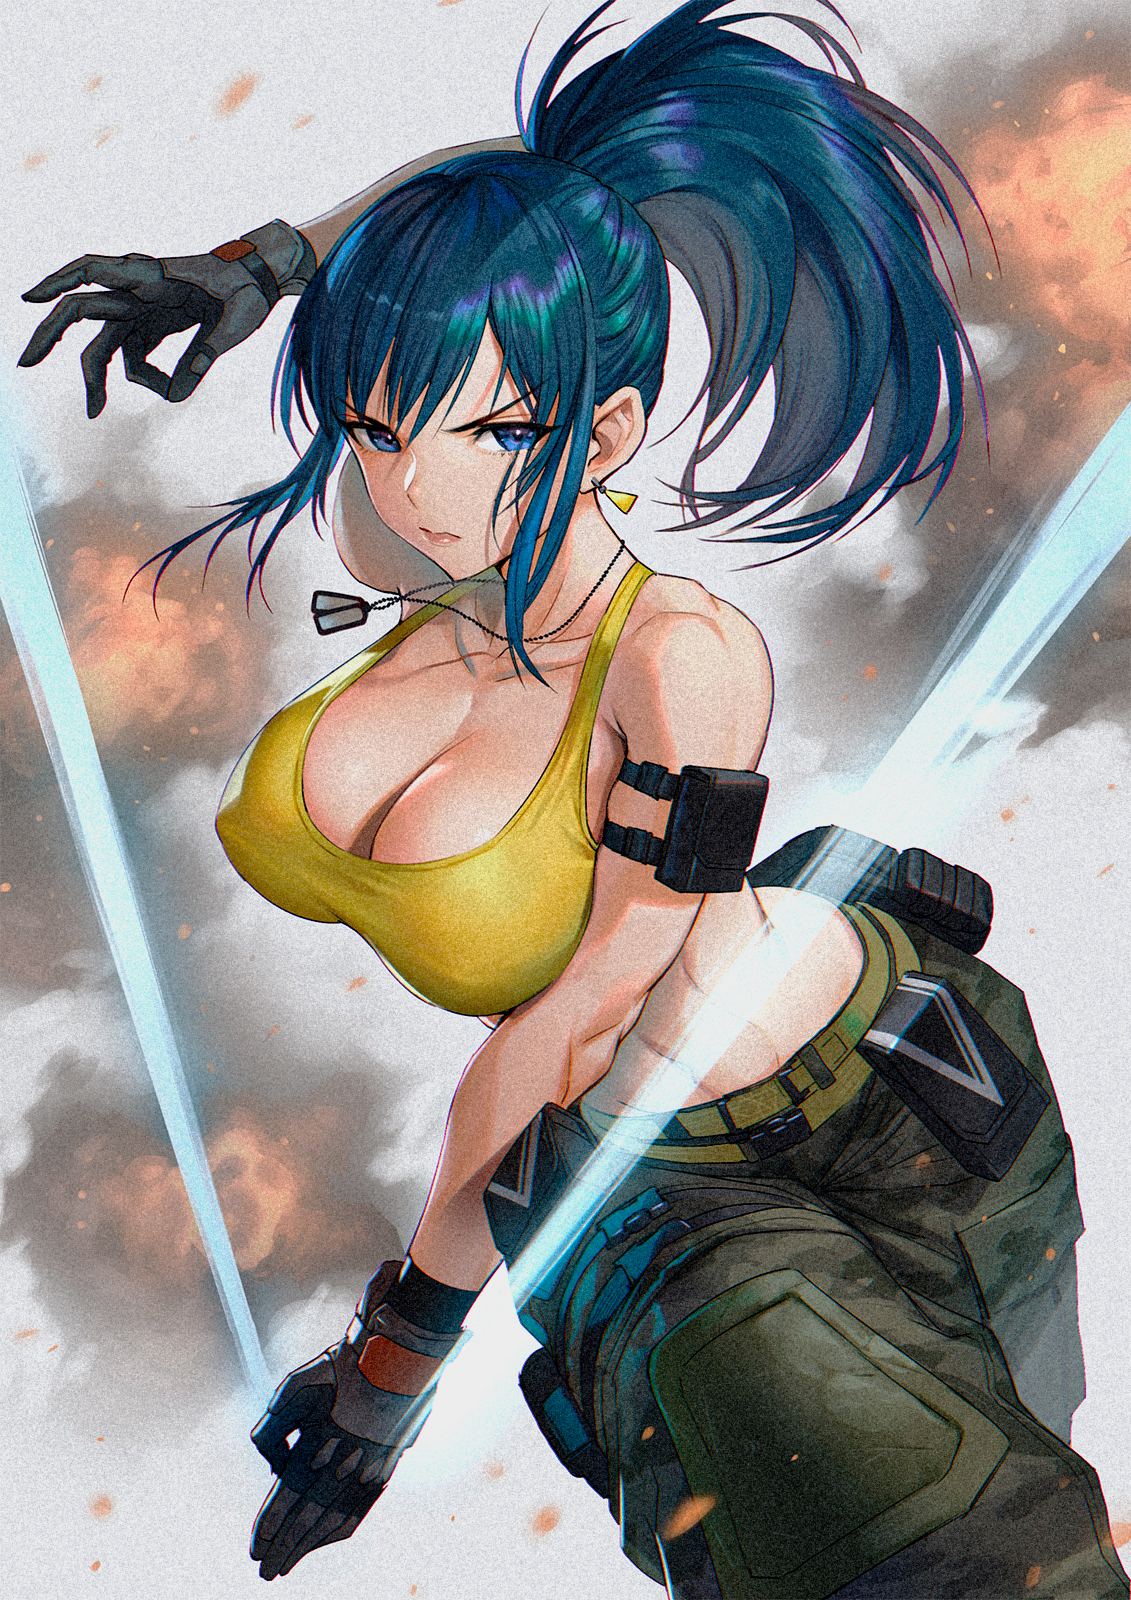 Anime 1131x1600 anime anime girls cleavage big boobs no bra King of Fighters Leona Heidern hard nipples video game girls video game warriors curvy boobs huge breasts angry video games women blue hair blue eyes looking at viewer fighting games video game characters wide breasts tank top skinny gloves top ponytail